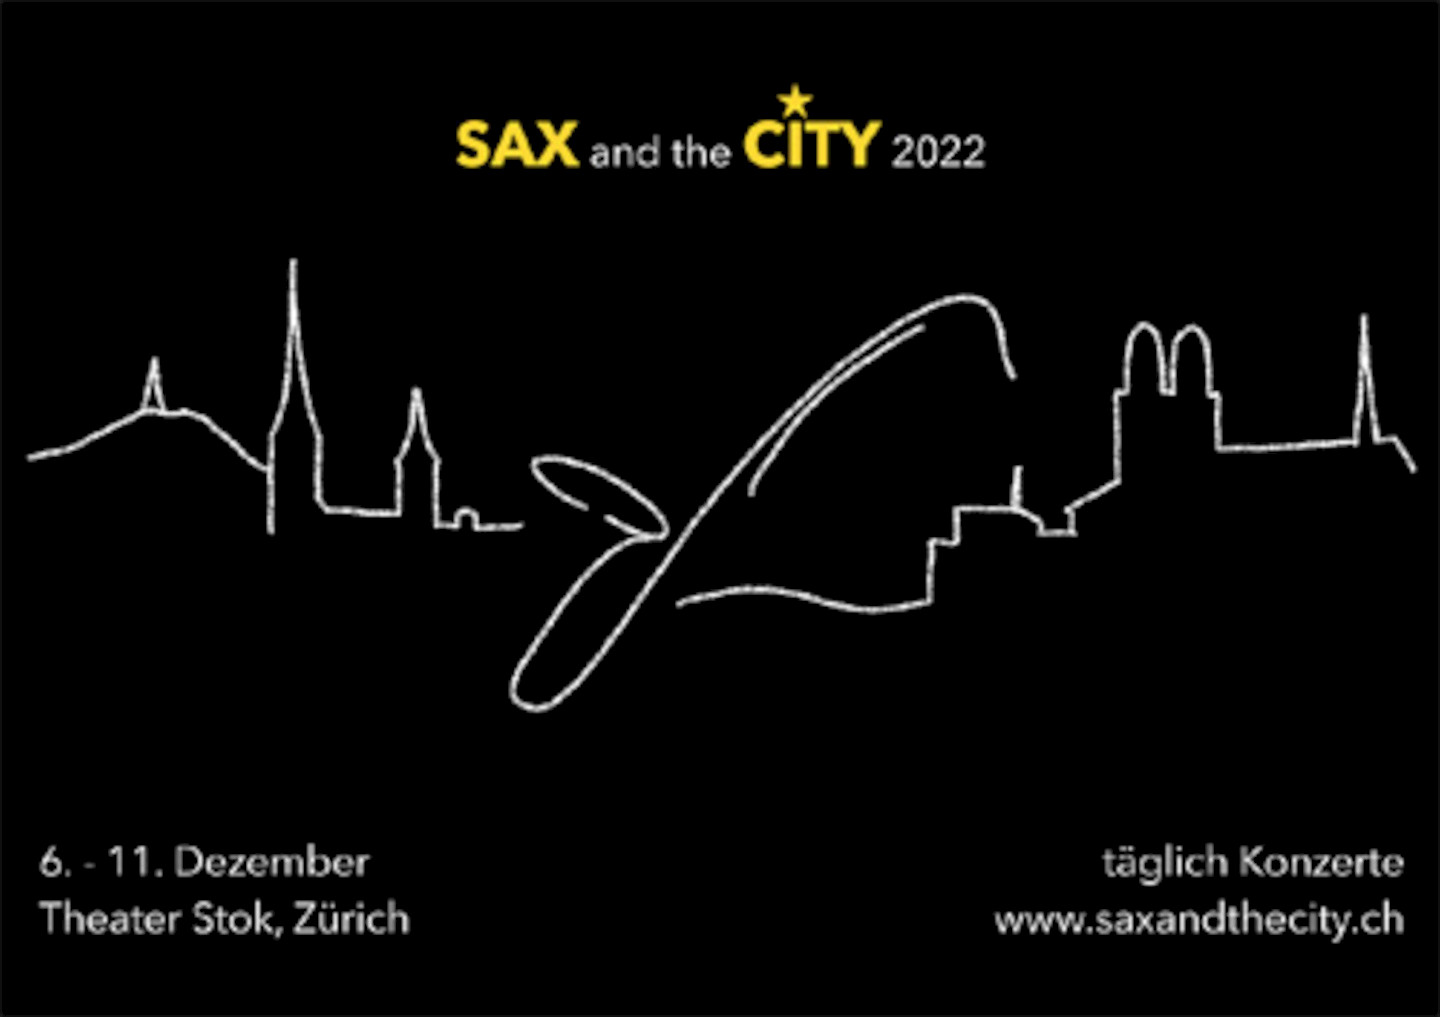 Sax and the City